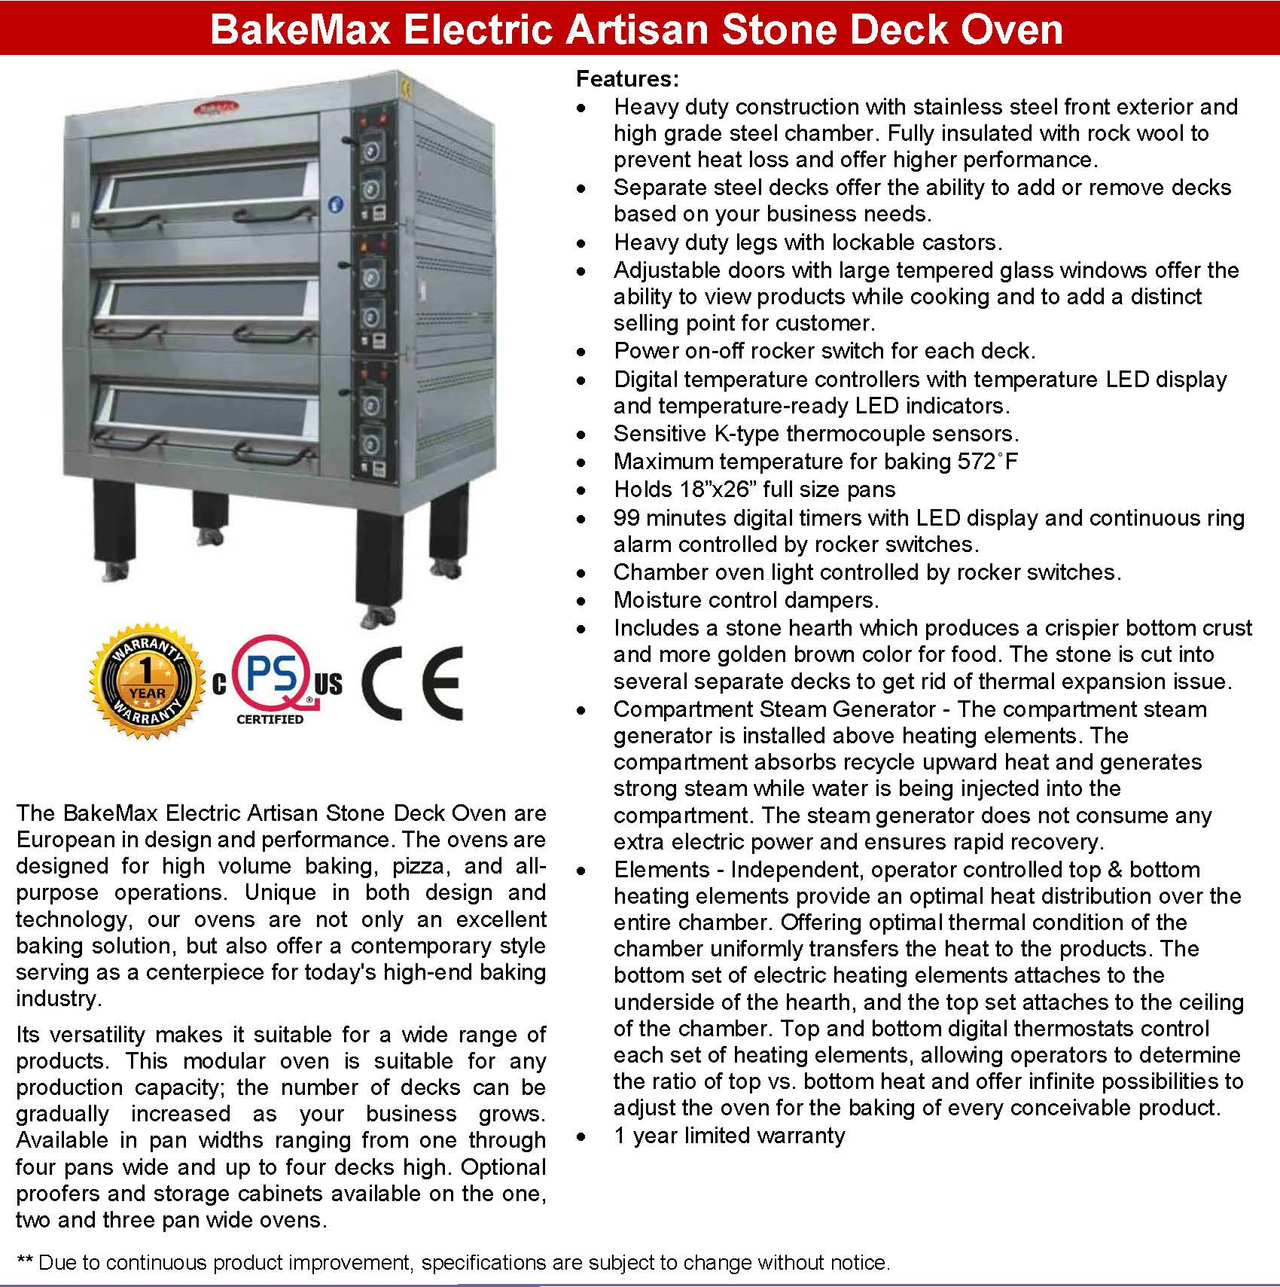 BakeMax Electric Artisan Stone Deck Ovens 4 Pan Wide